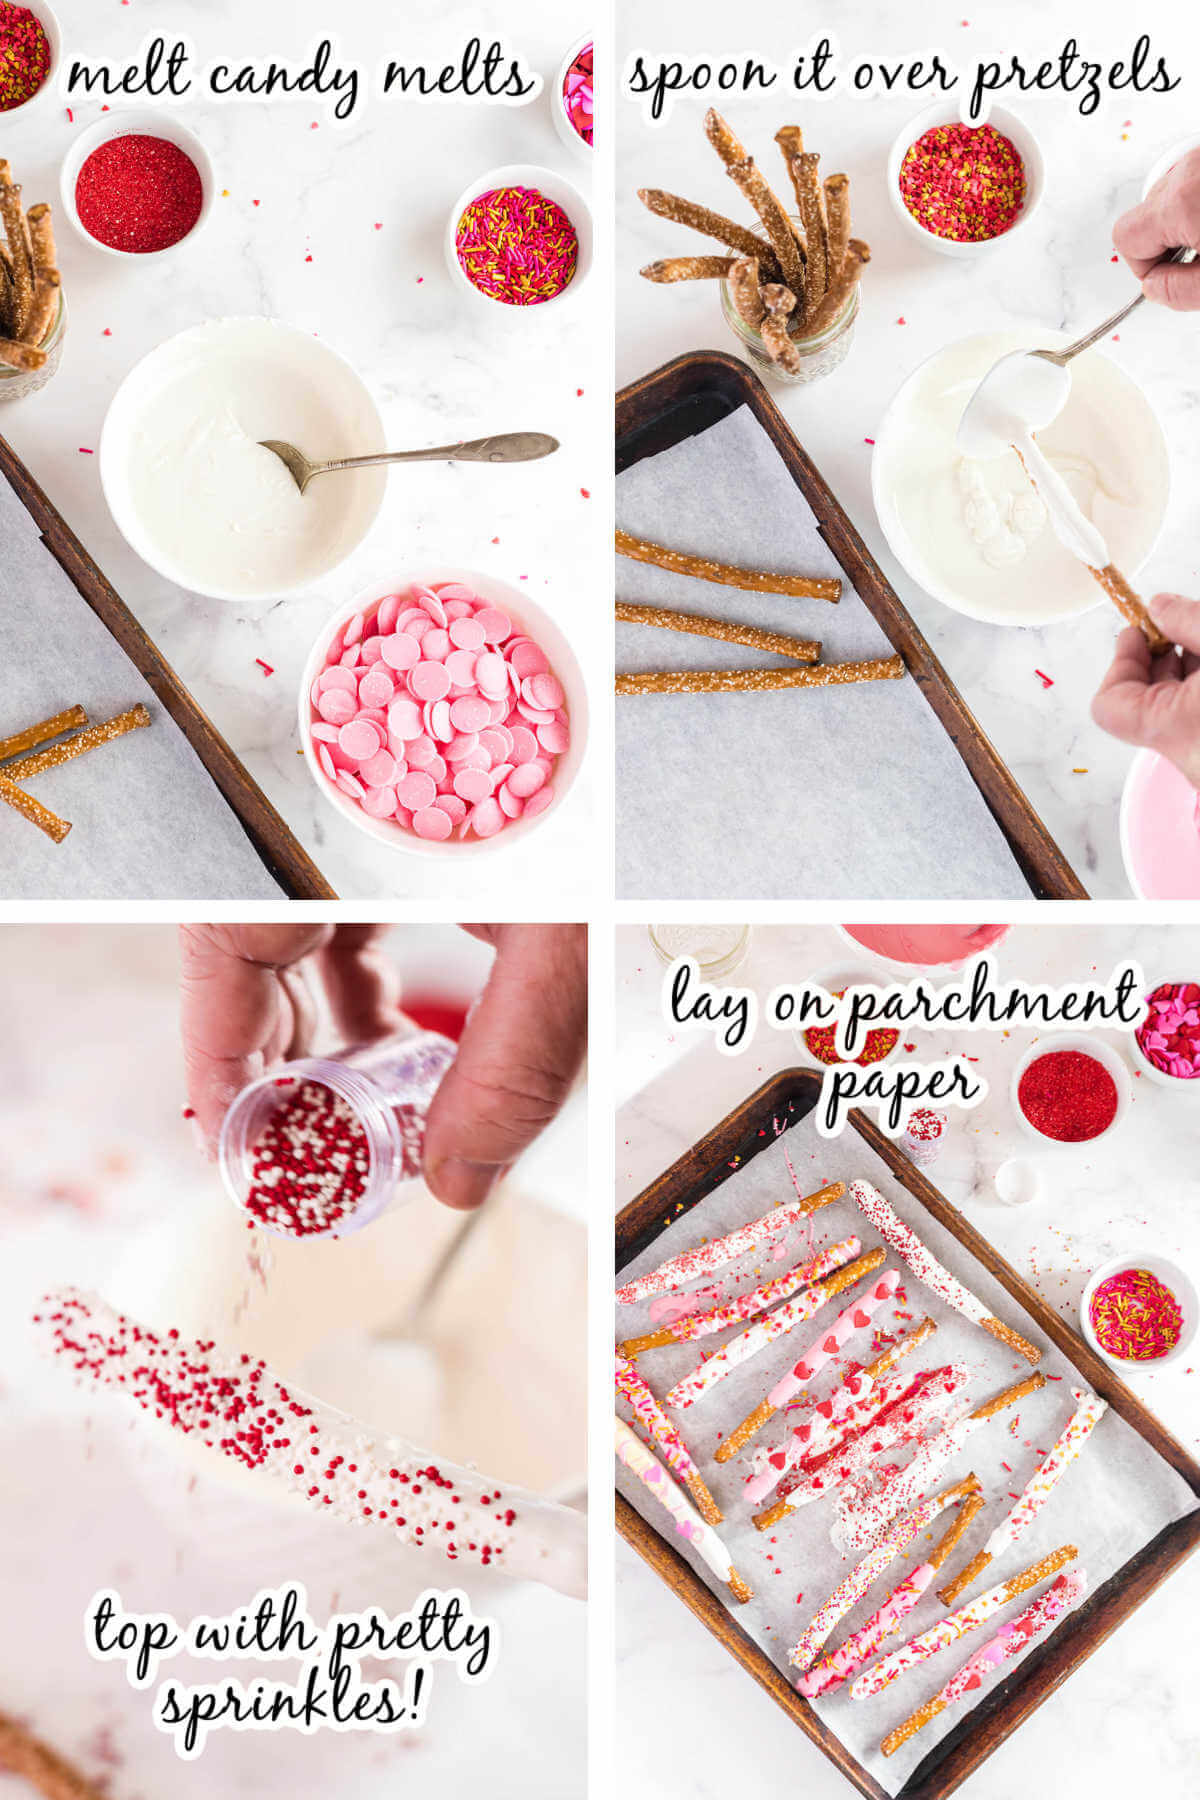 Instructions to make Valentine treats. With print overlay.